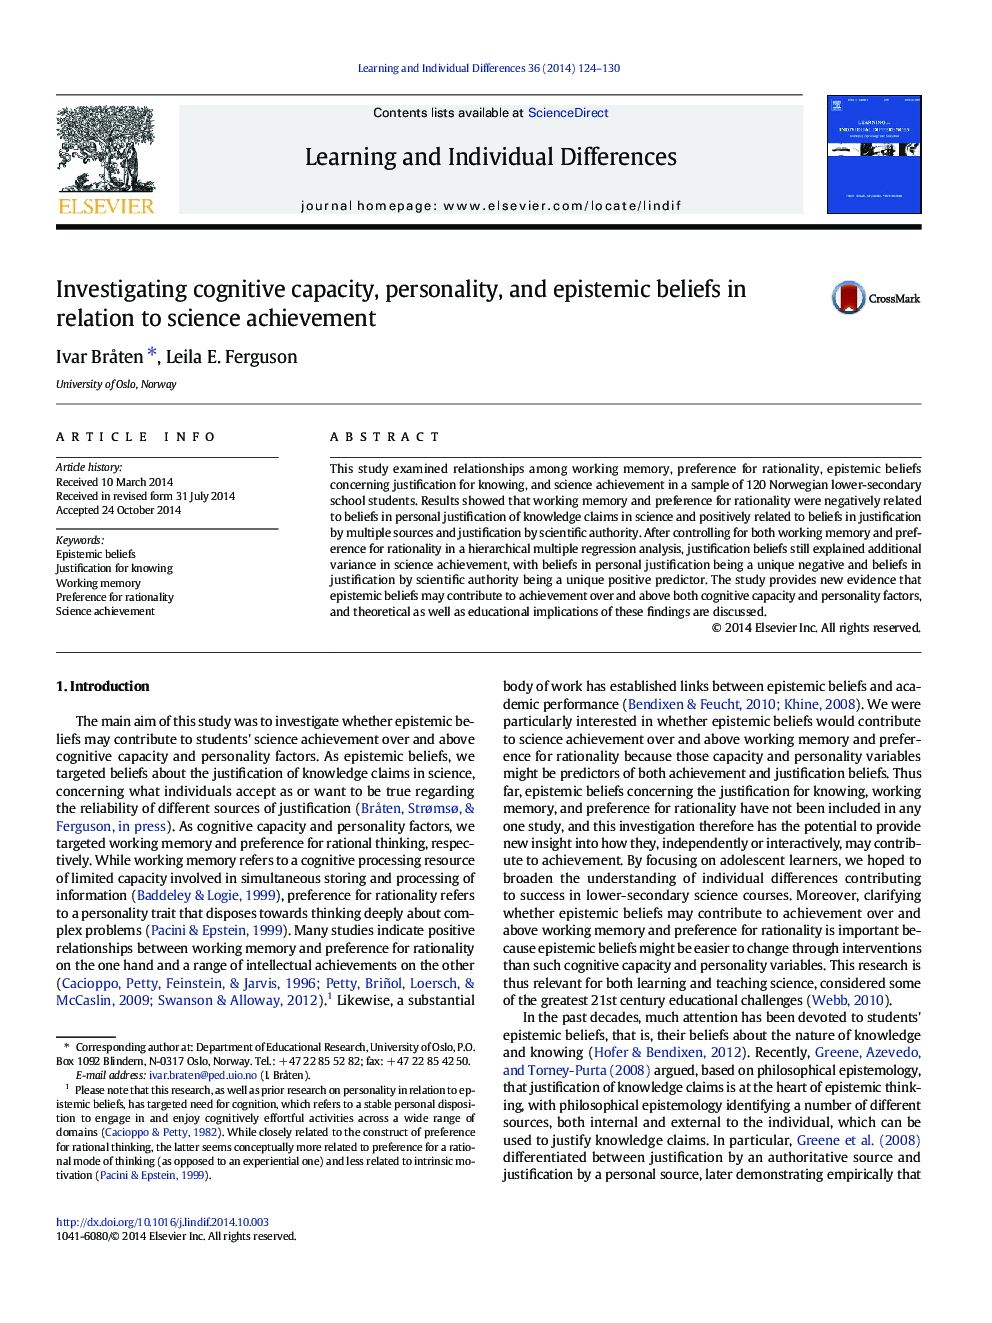 Investigating cognitive capacity, personality, and epistemic beliefs in relation to science achievement